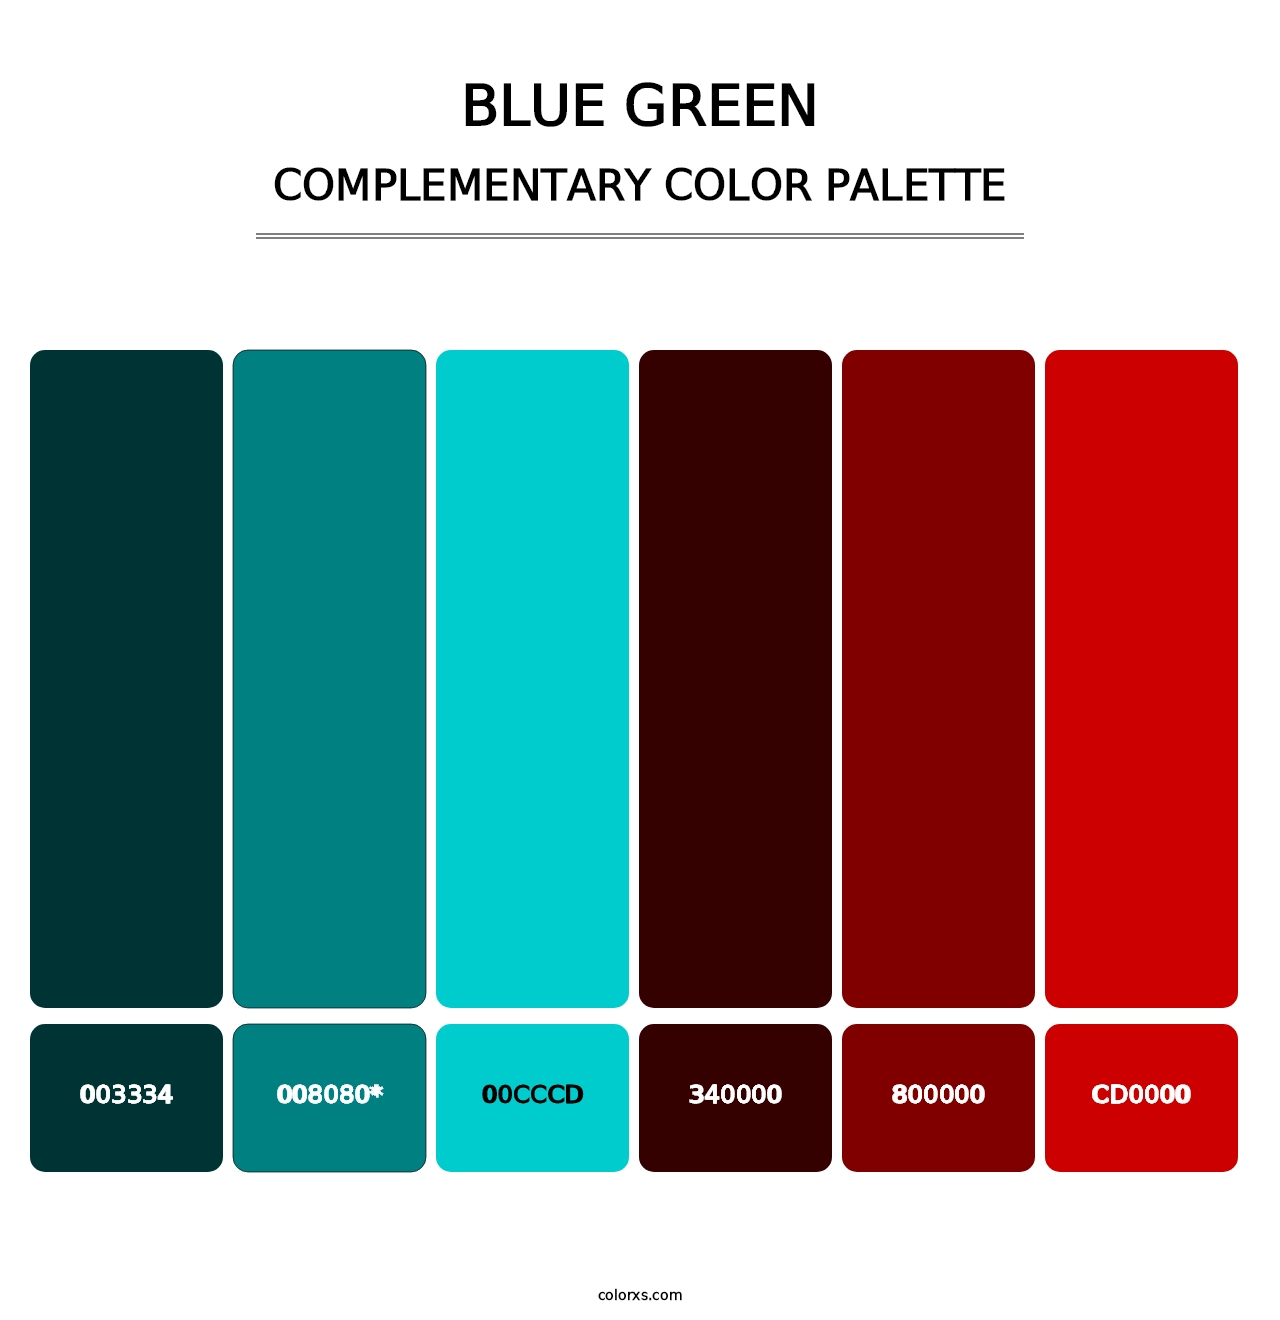 Blue Green - Complementary Color Palette